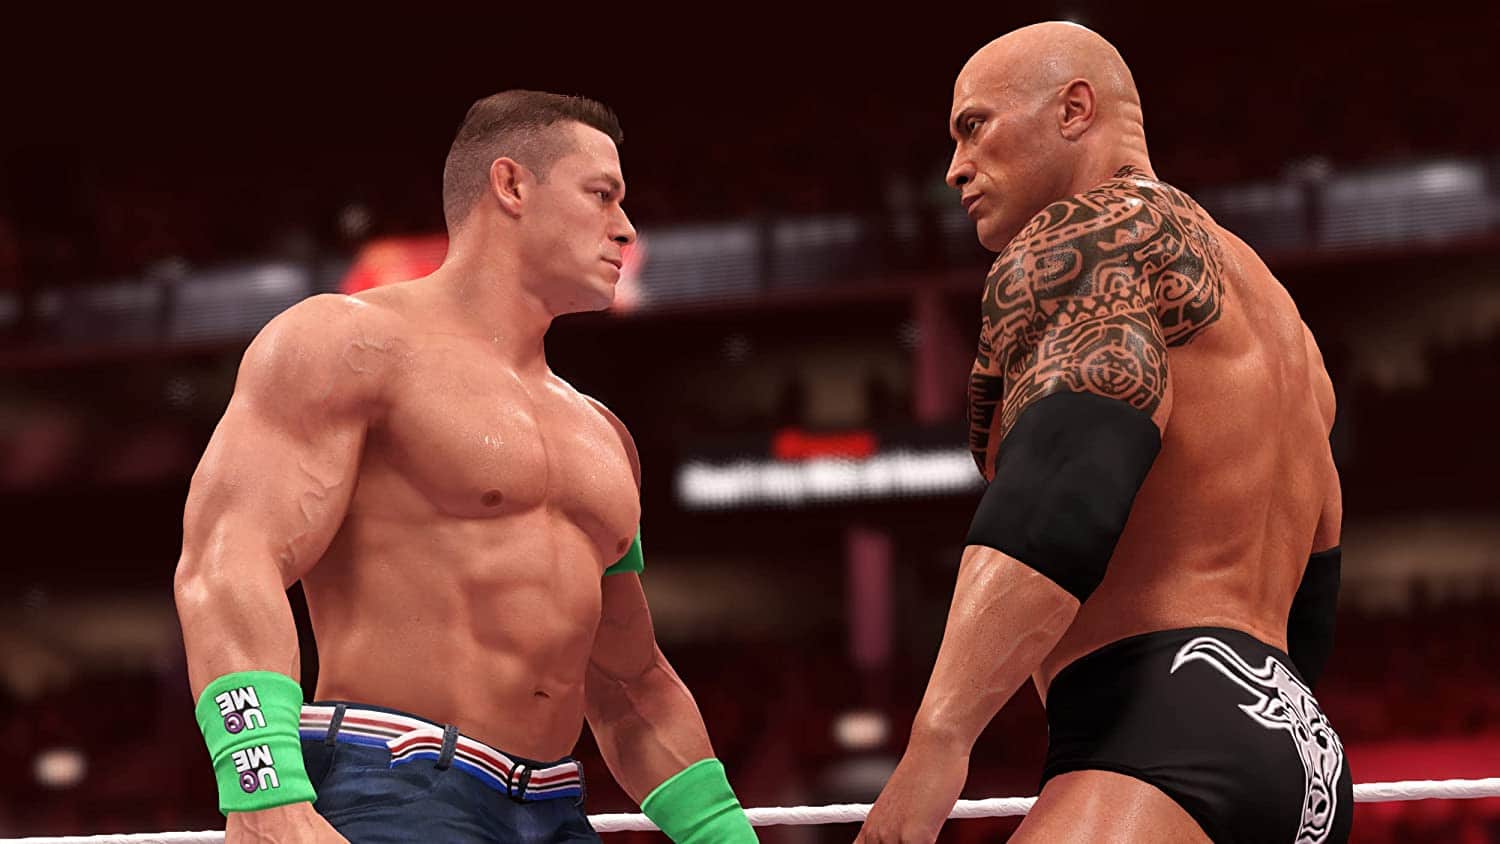 Latest WWE 2K22 Report Dives Into the New MyGM Mode